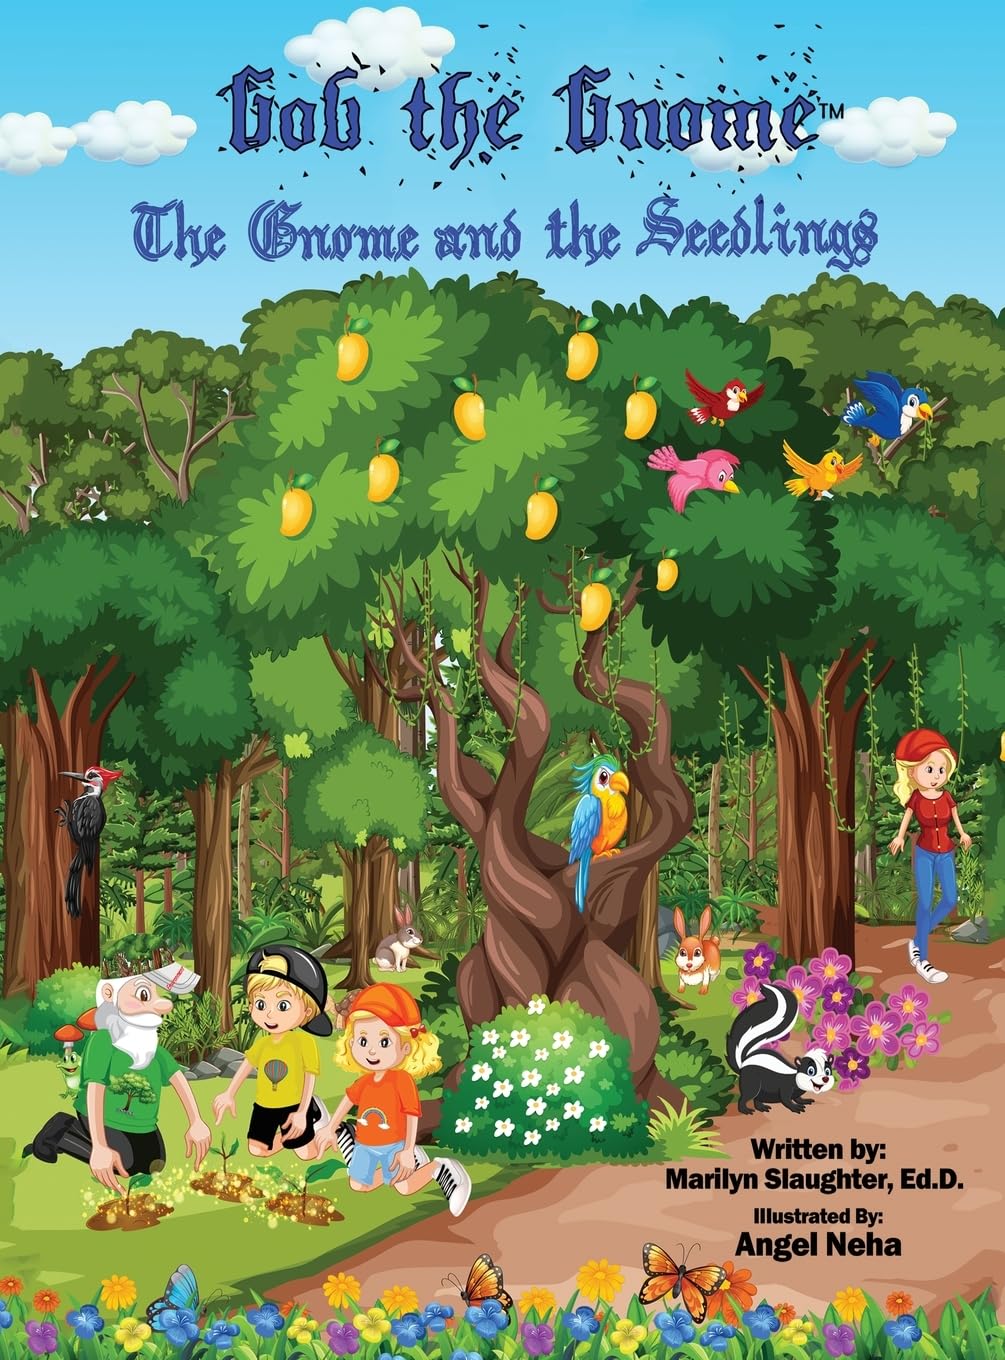 New children’s book "Gob the Gnome™: The Gnome and the Seedlings" by Marilyn Slaughter, Ed.D., is released, a magical story that teaches kids about nature, the environment, and the importance of trees